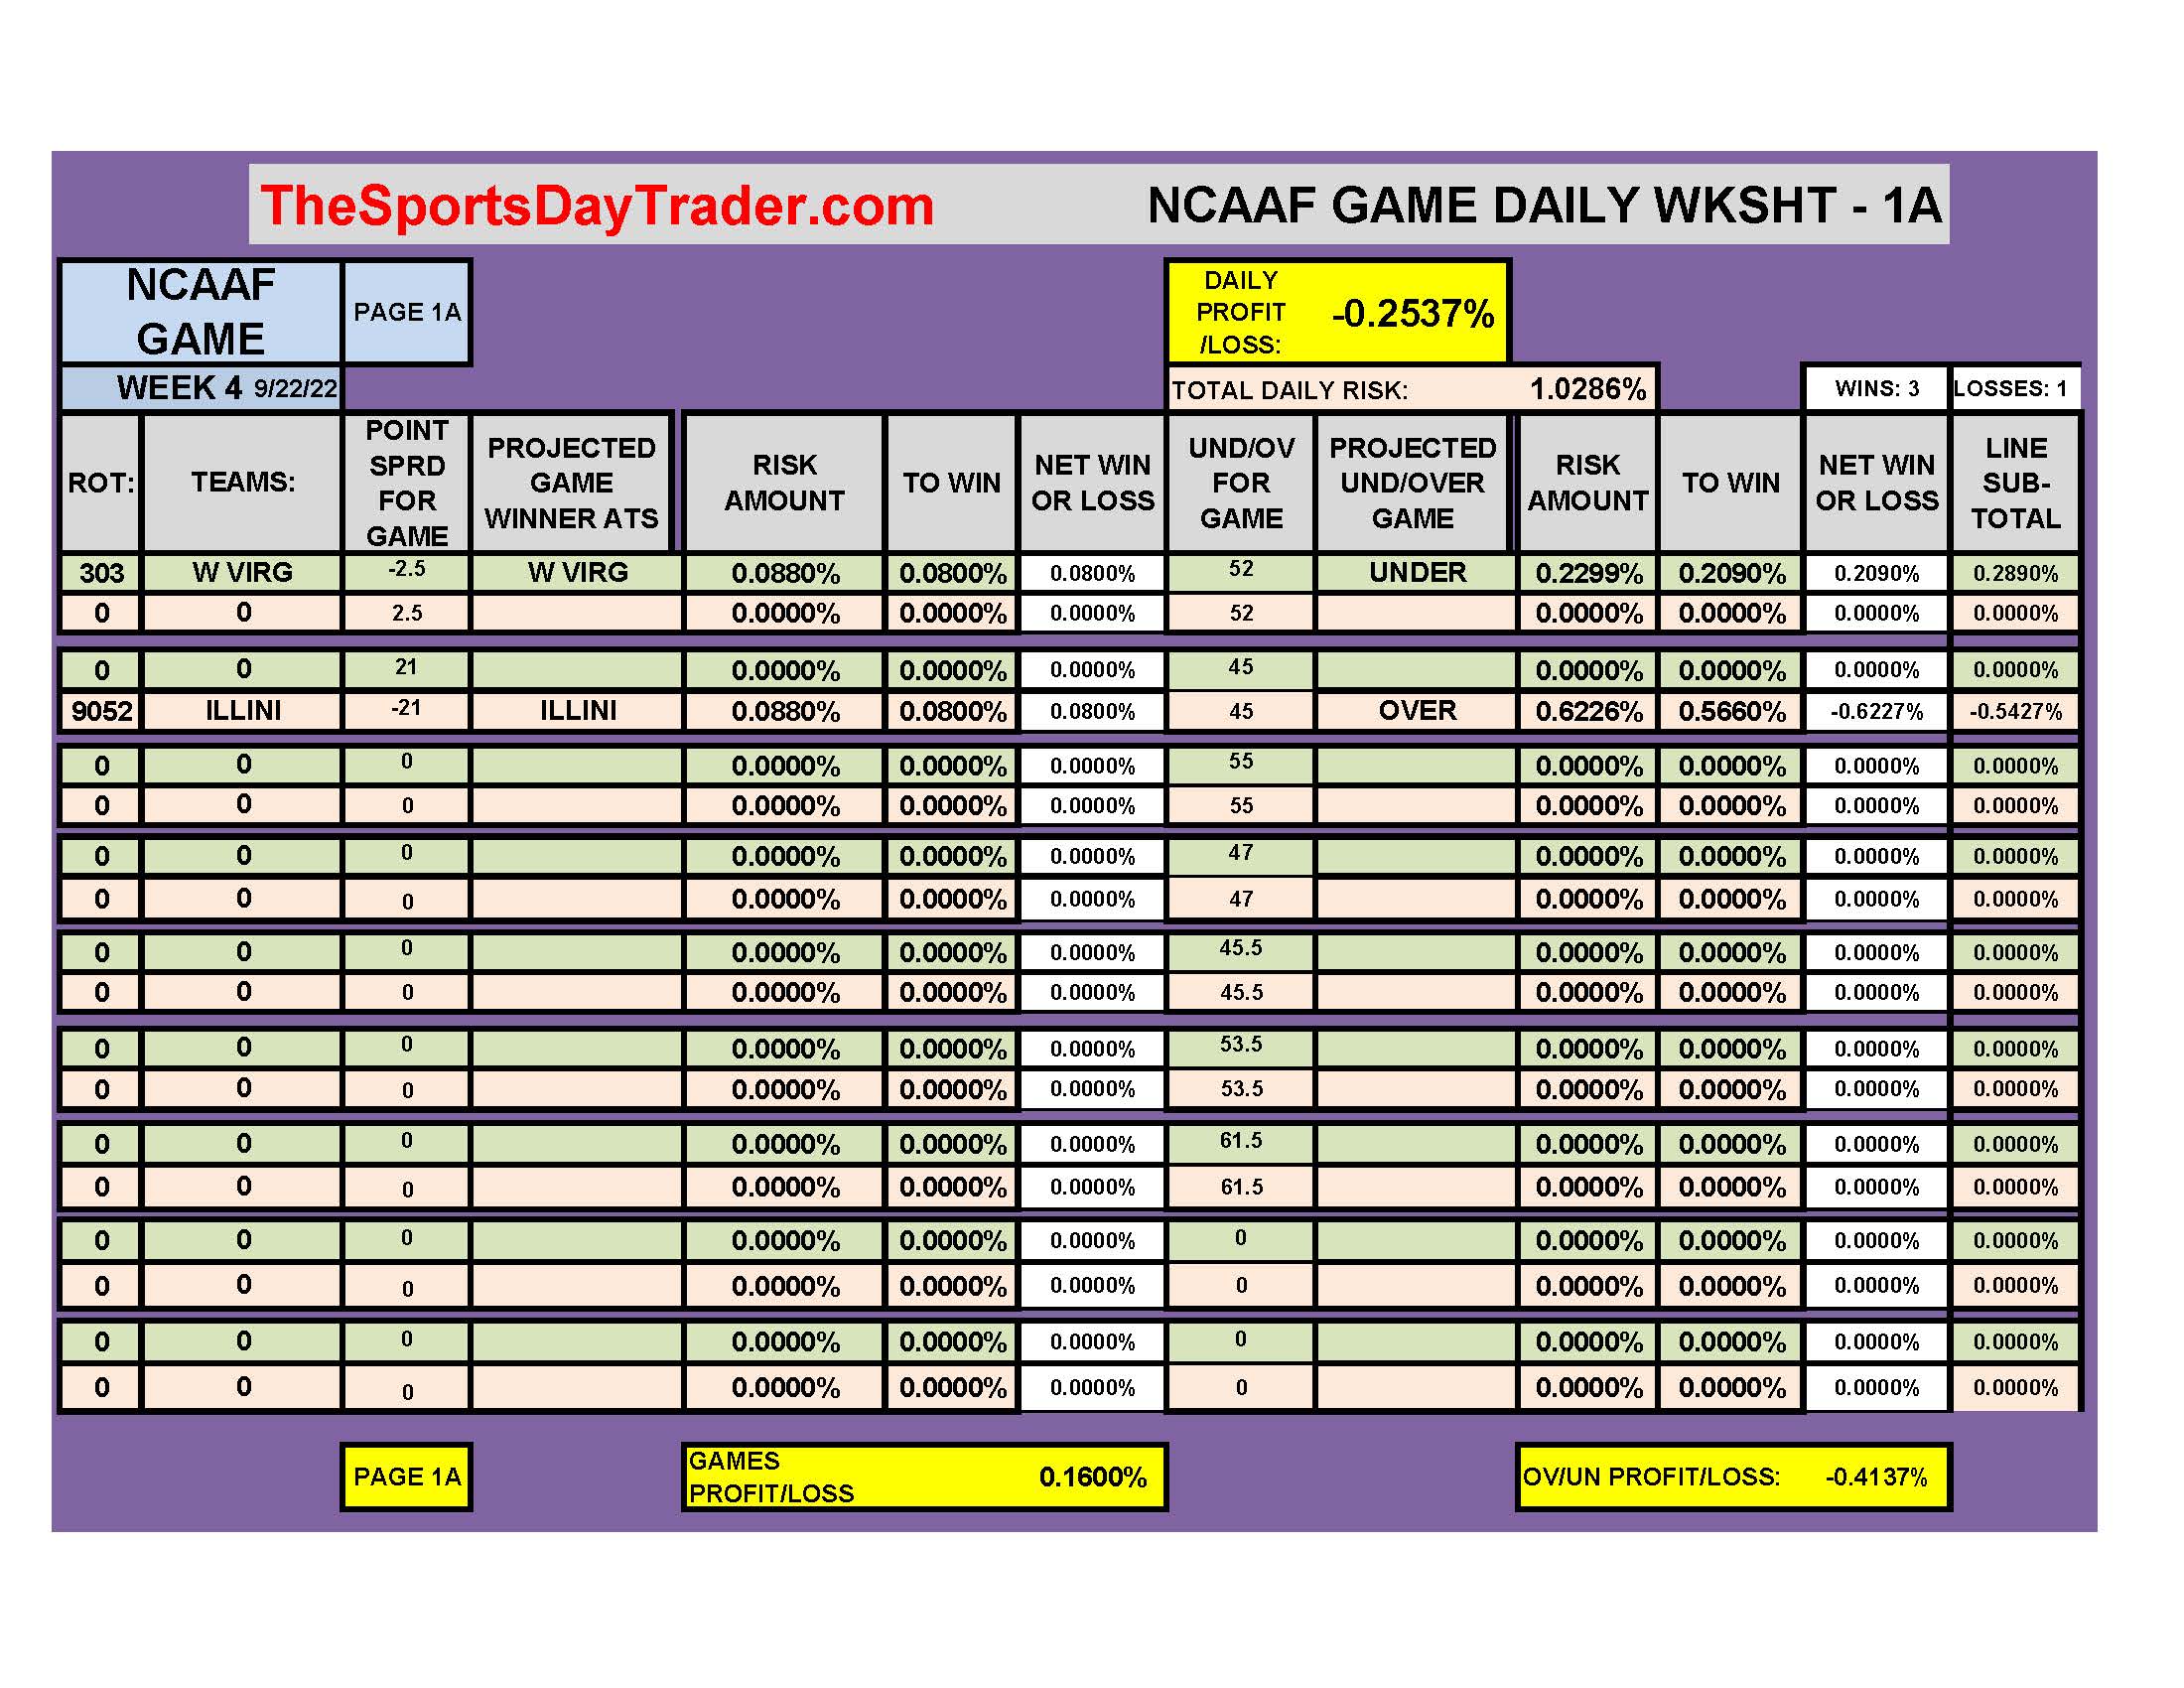 NCAAF 9/22/22 GAME DAILY RESULTS